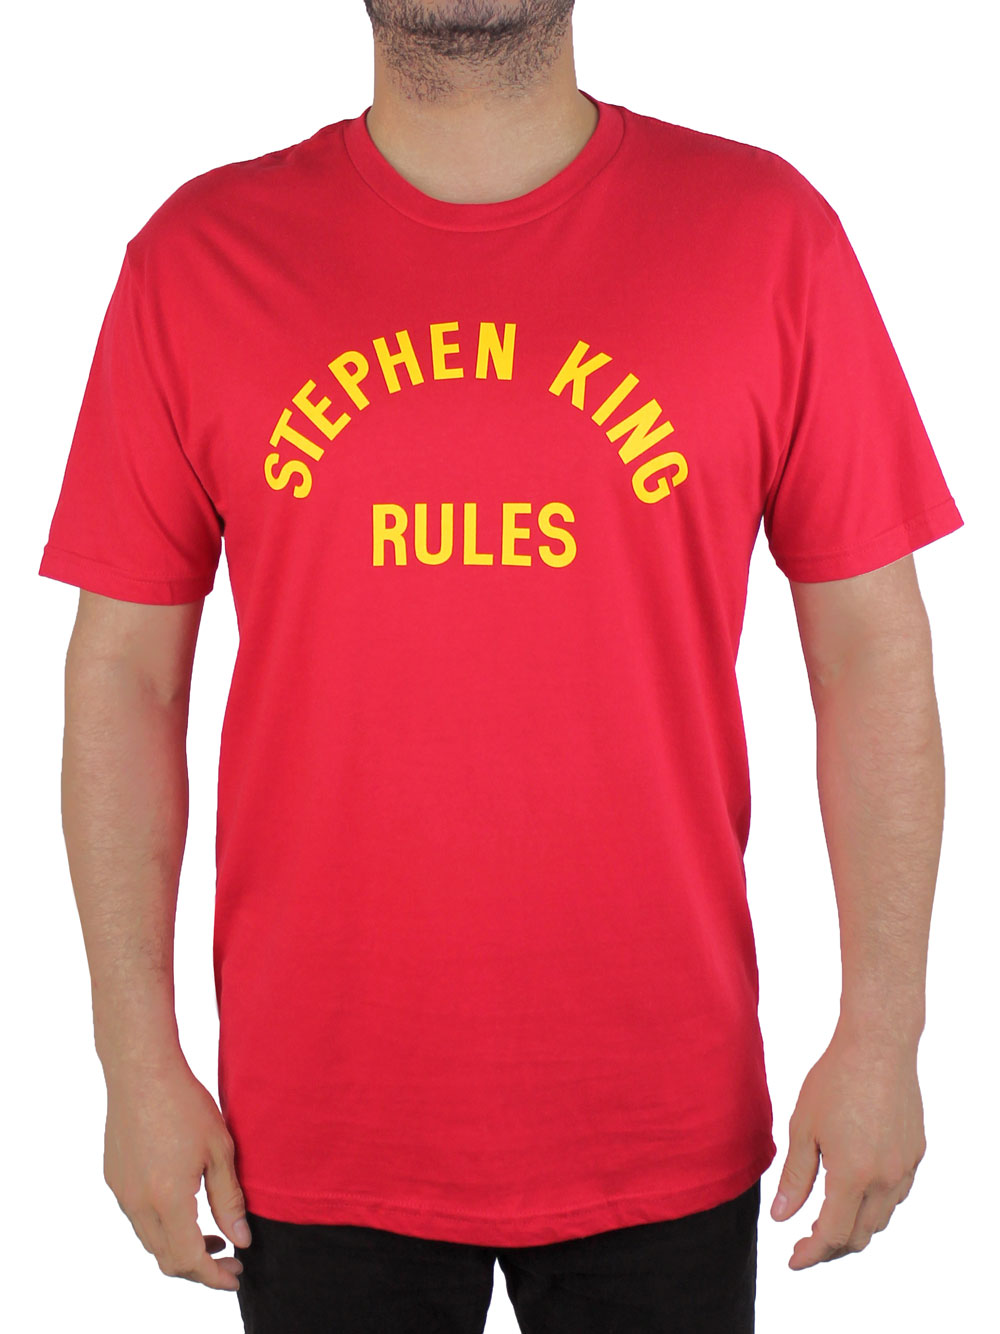 Stephen King Rules Shirt Front View